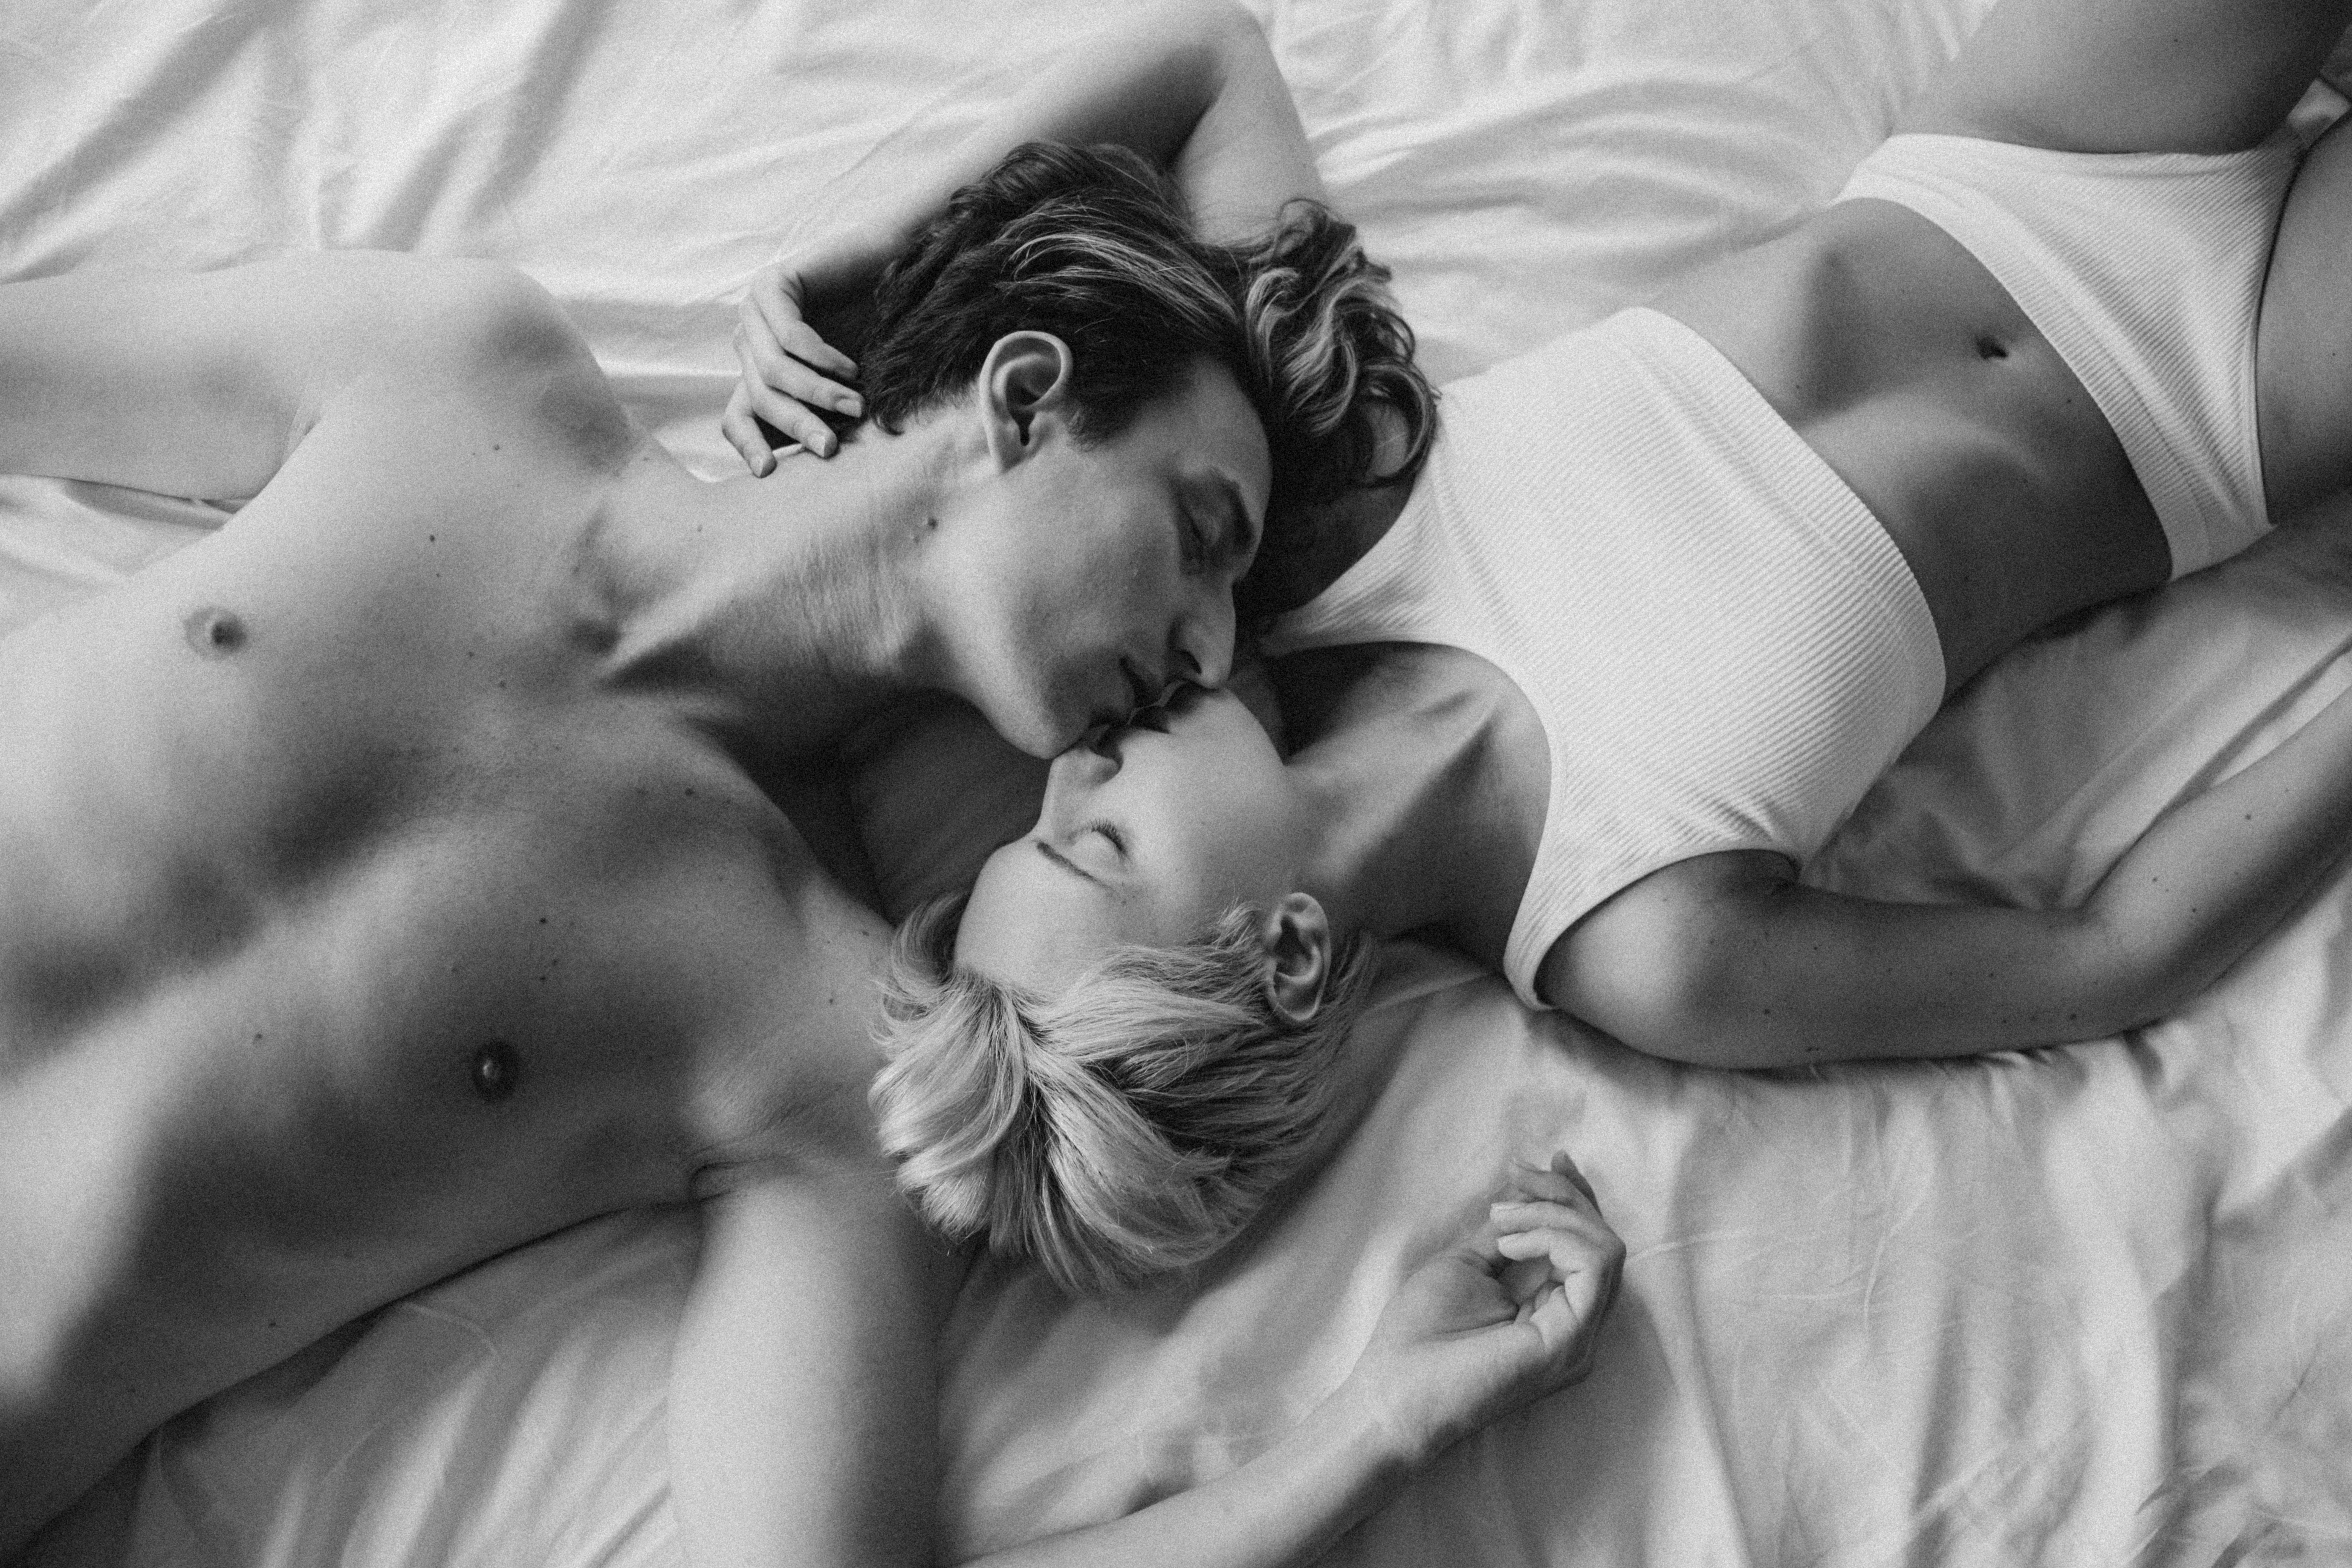 A couple almost kissing while lying in bed. | Source: Pexels